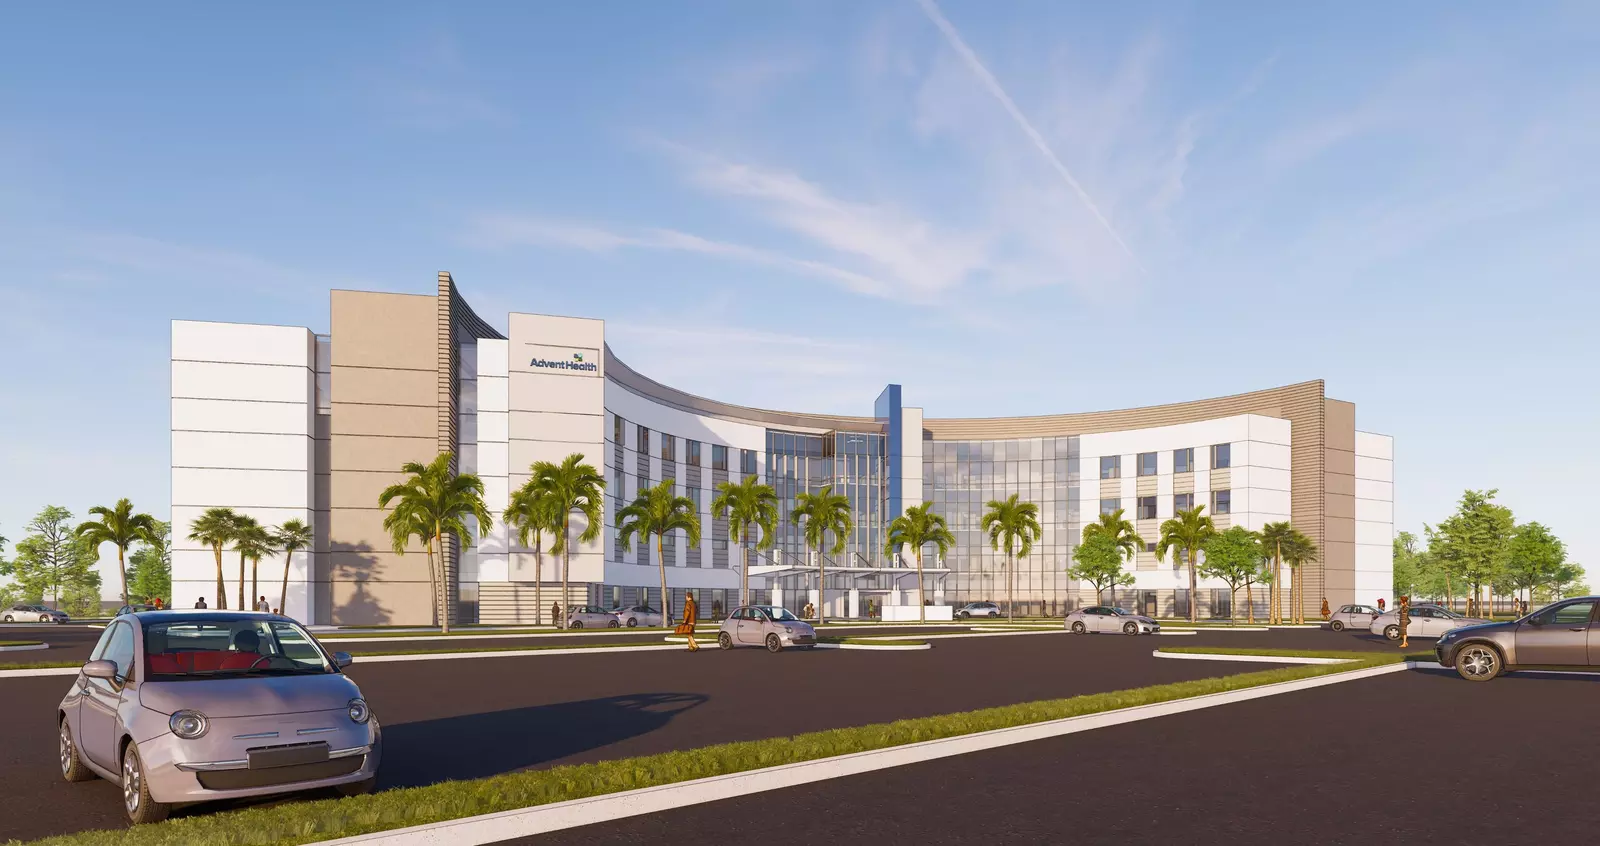 The project will provide 100 more beds and $100 million investment in Flagler County.